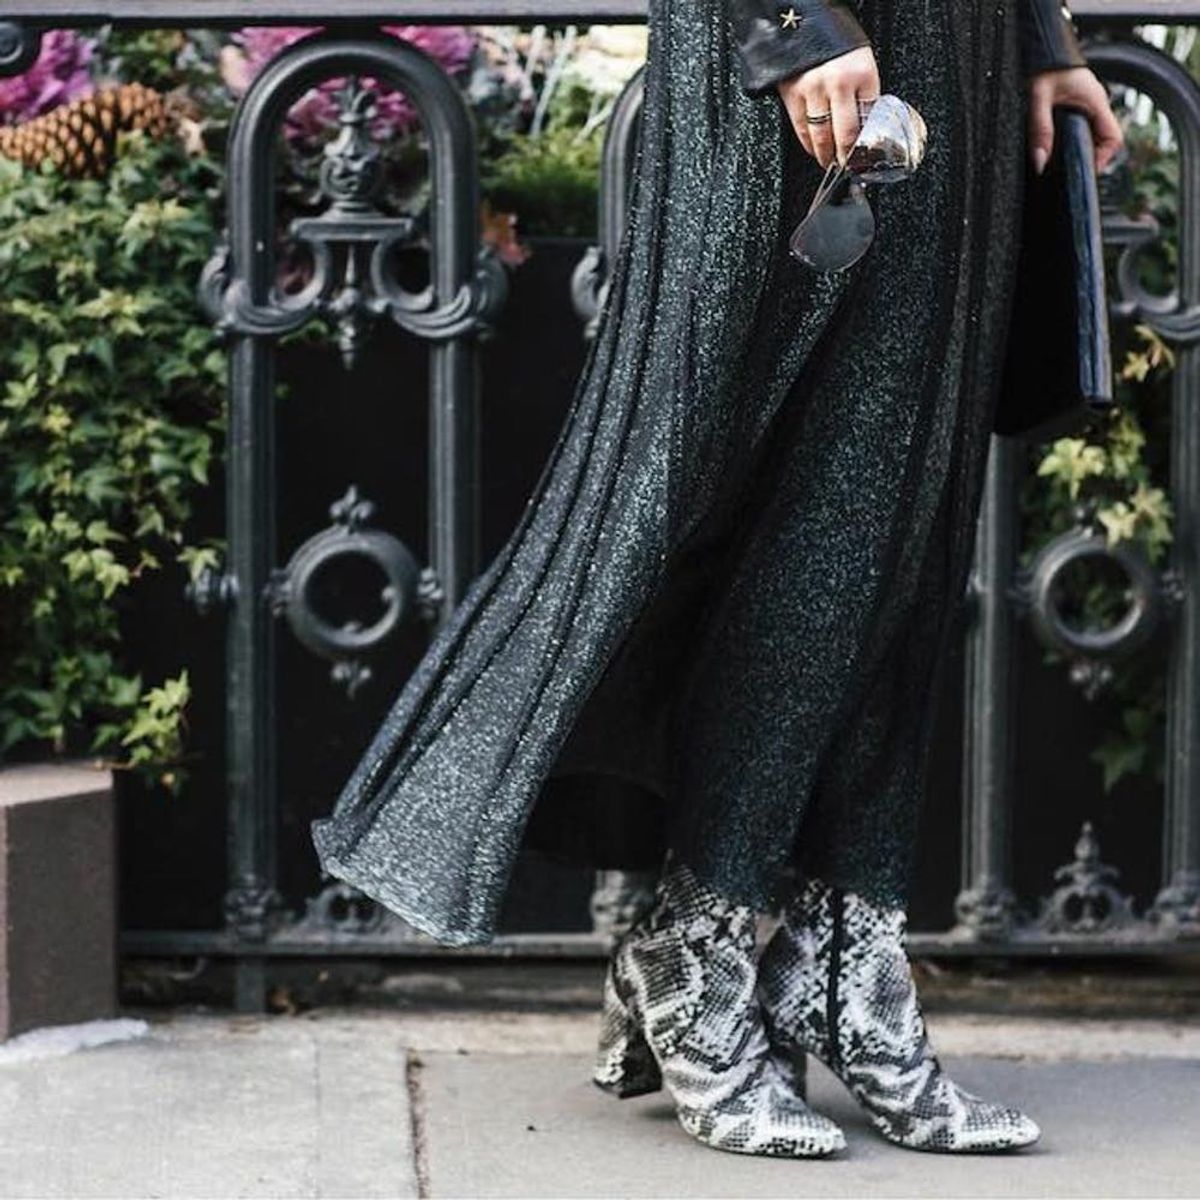 The Street Style Approved Way to Rock a Maxi Dress for Fall